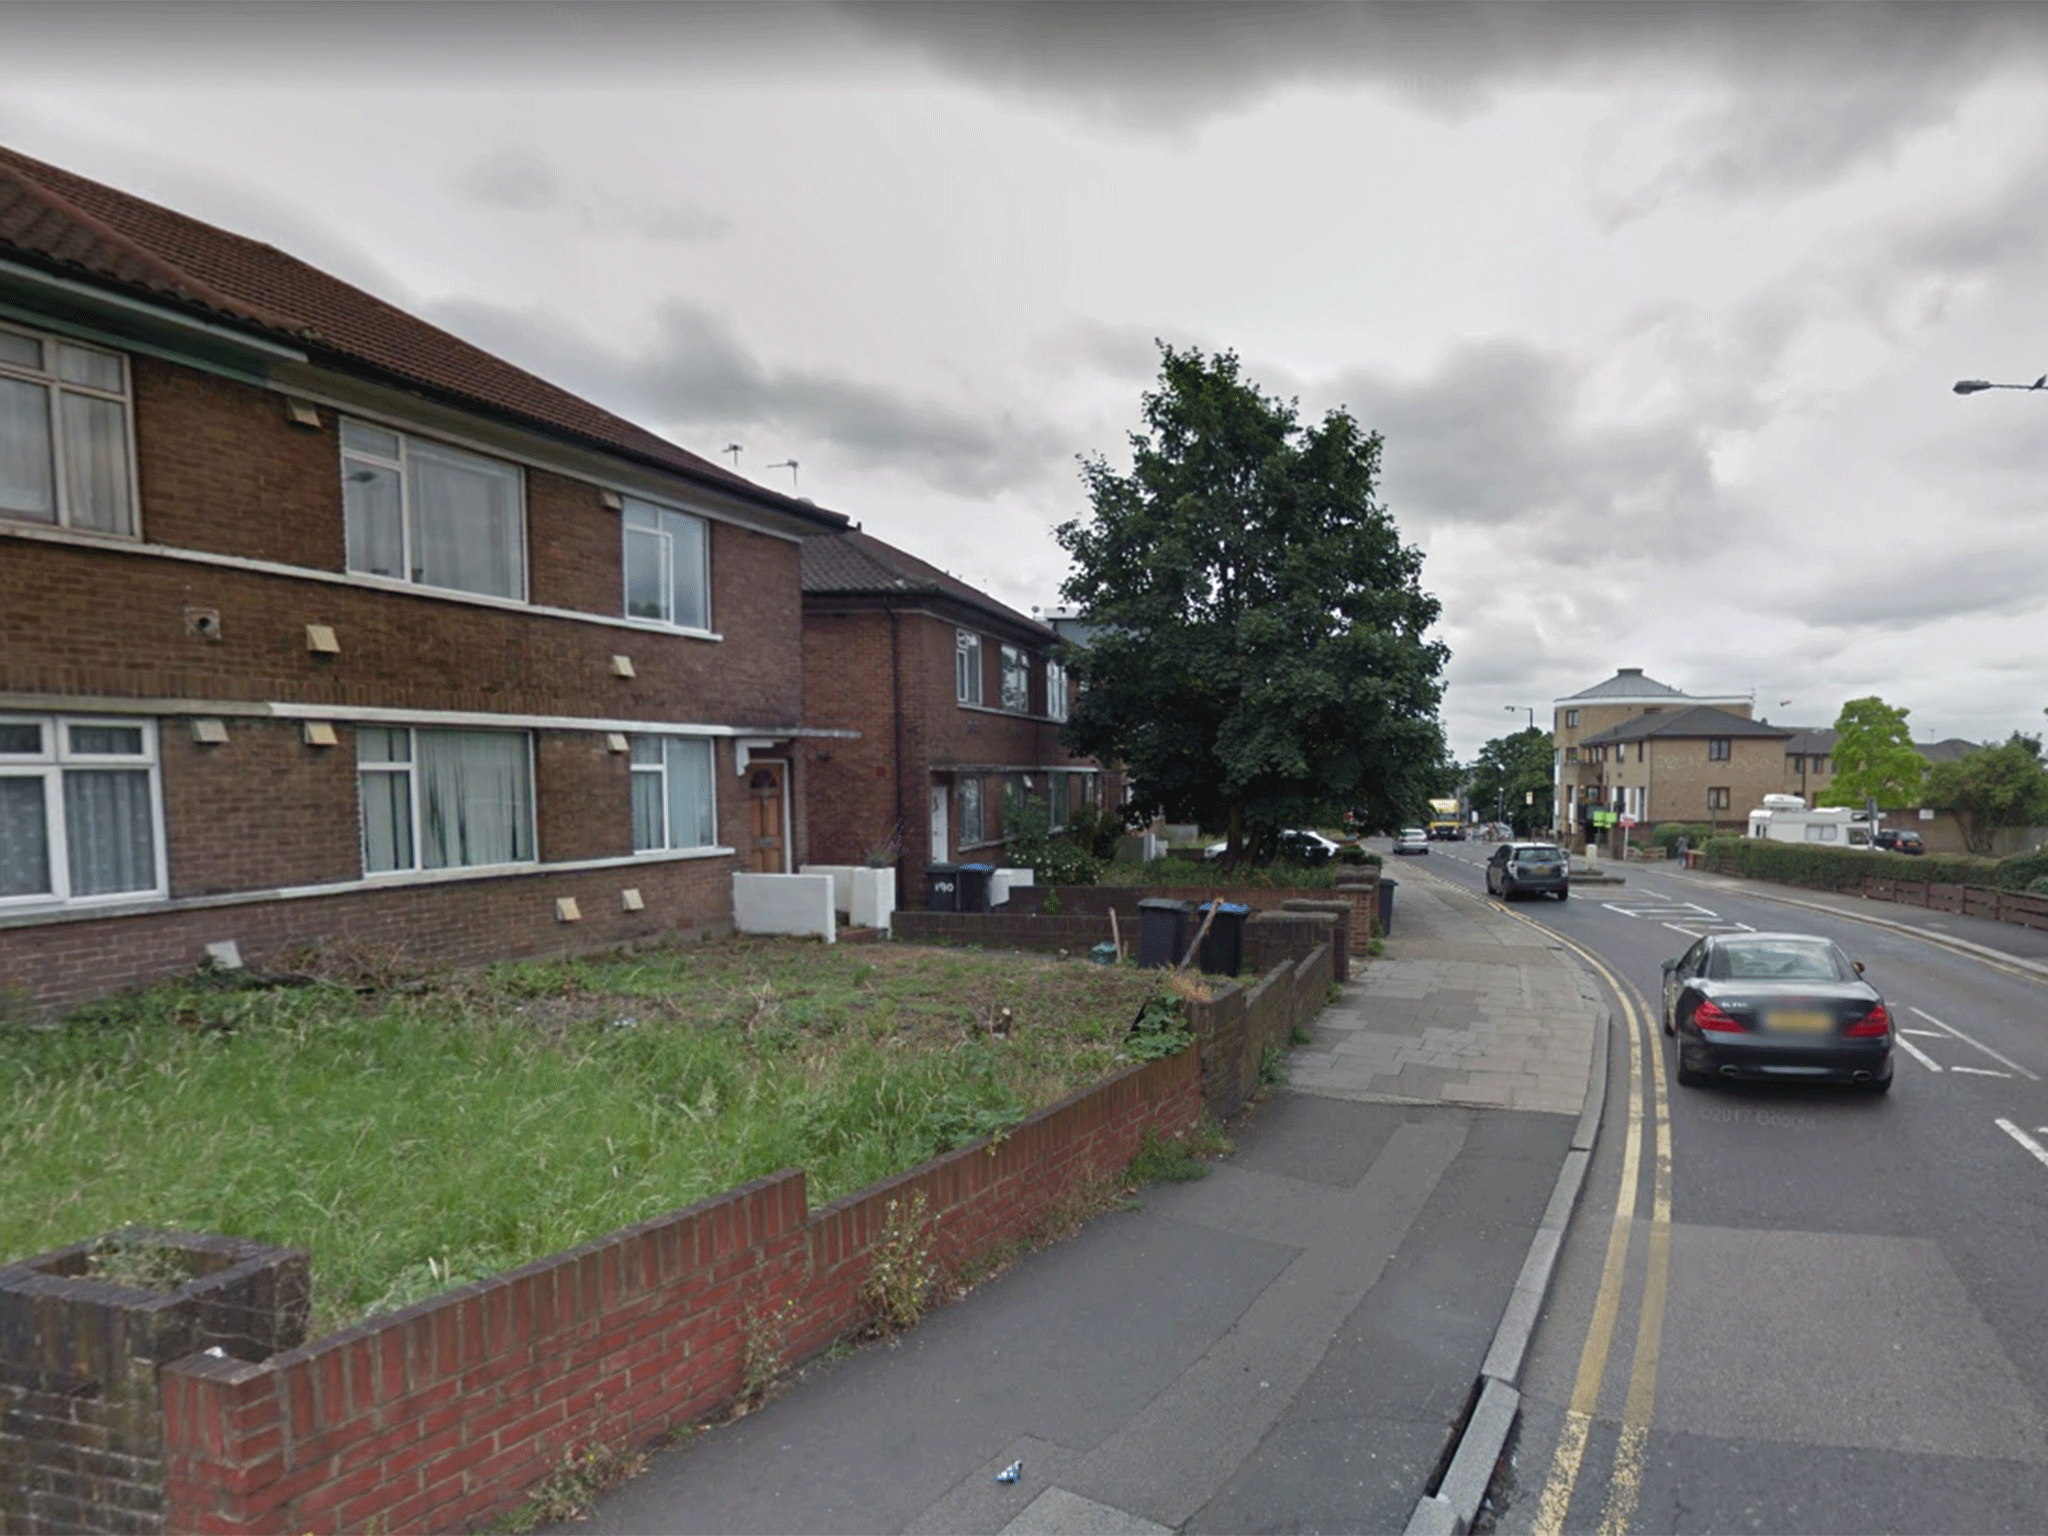 The incident took place in a residential property on Neasden Lane, Brent